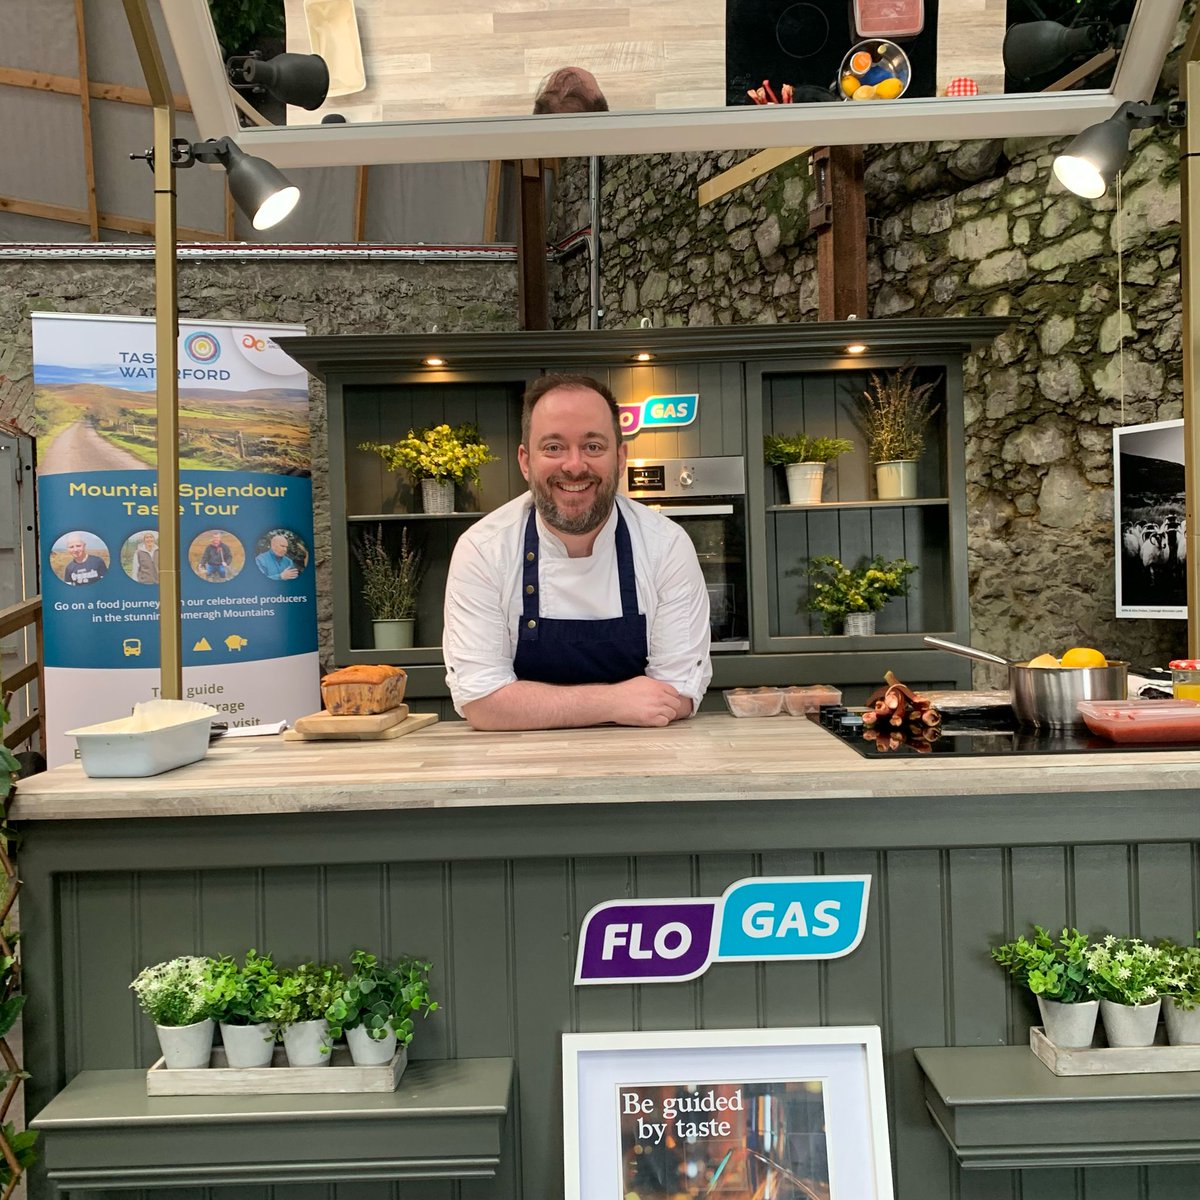 Our demo with award-winning pastry chef Shane Smith at this year’s @WdFoodFestival was a massive hit. 👏 So for anyone who missed the ‘spring bakes’ - we've added the recipes to our website. Visit our blog - let us know how you get on! 😍 (food pics – credit Shane Smith)